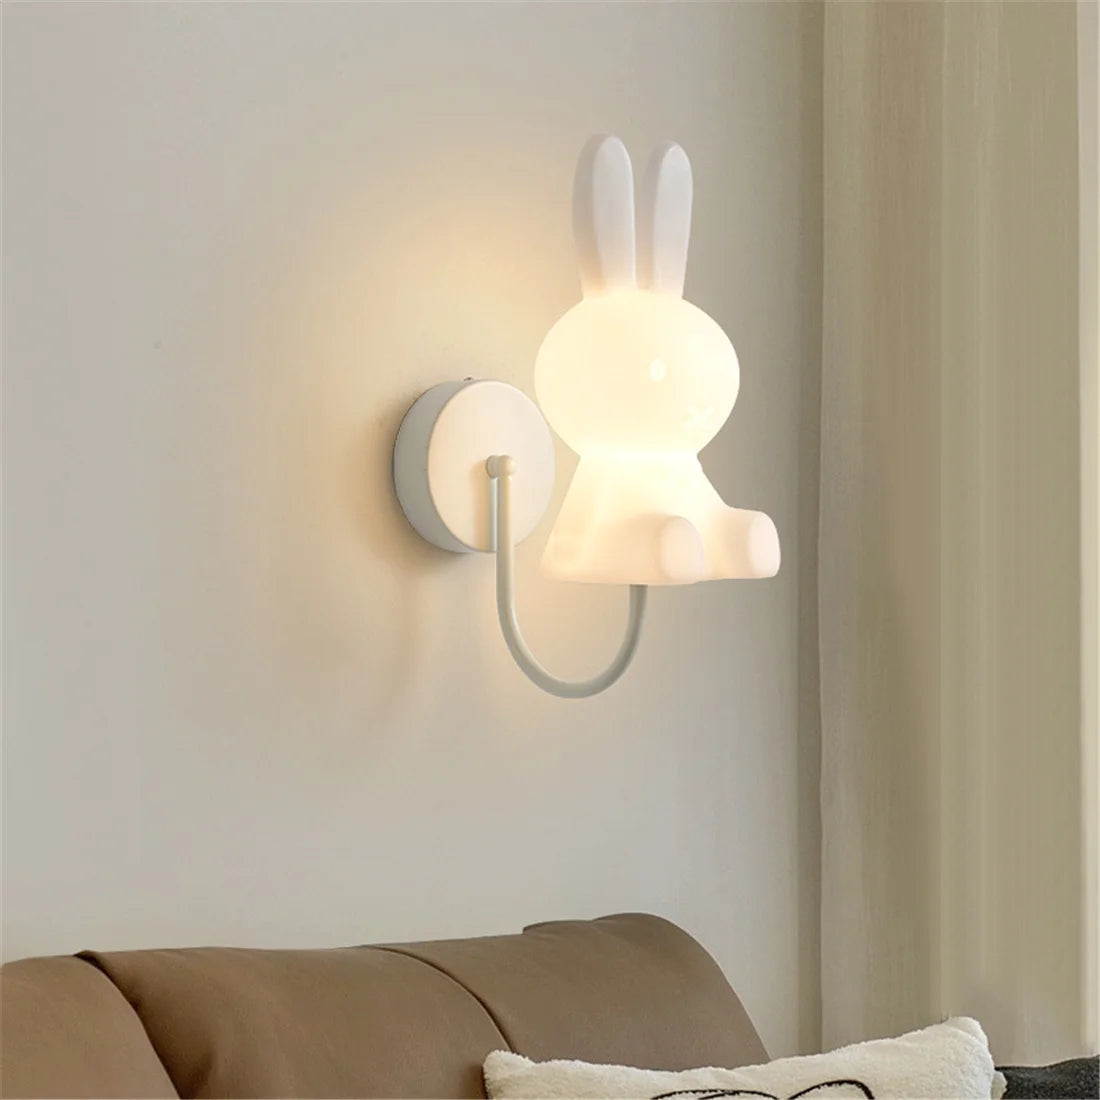 Cartoon Rabbit Kids Bedroom LED Wall Lamp – Home Decoration for Corridor, Stairs, Bedside, Living Room Sconces, Baby Sleeping Night Lights